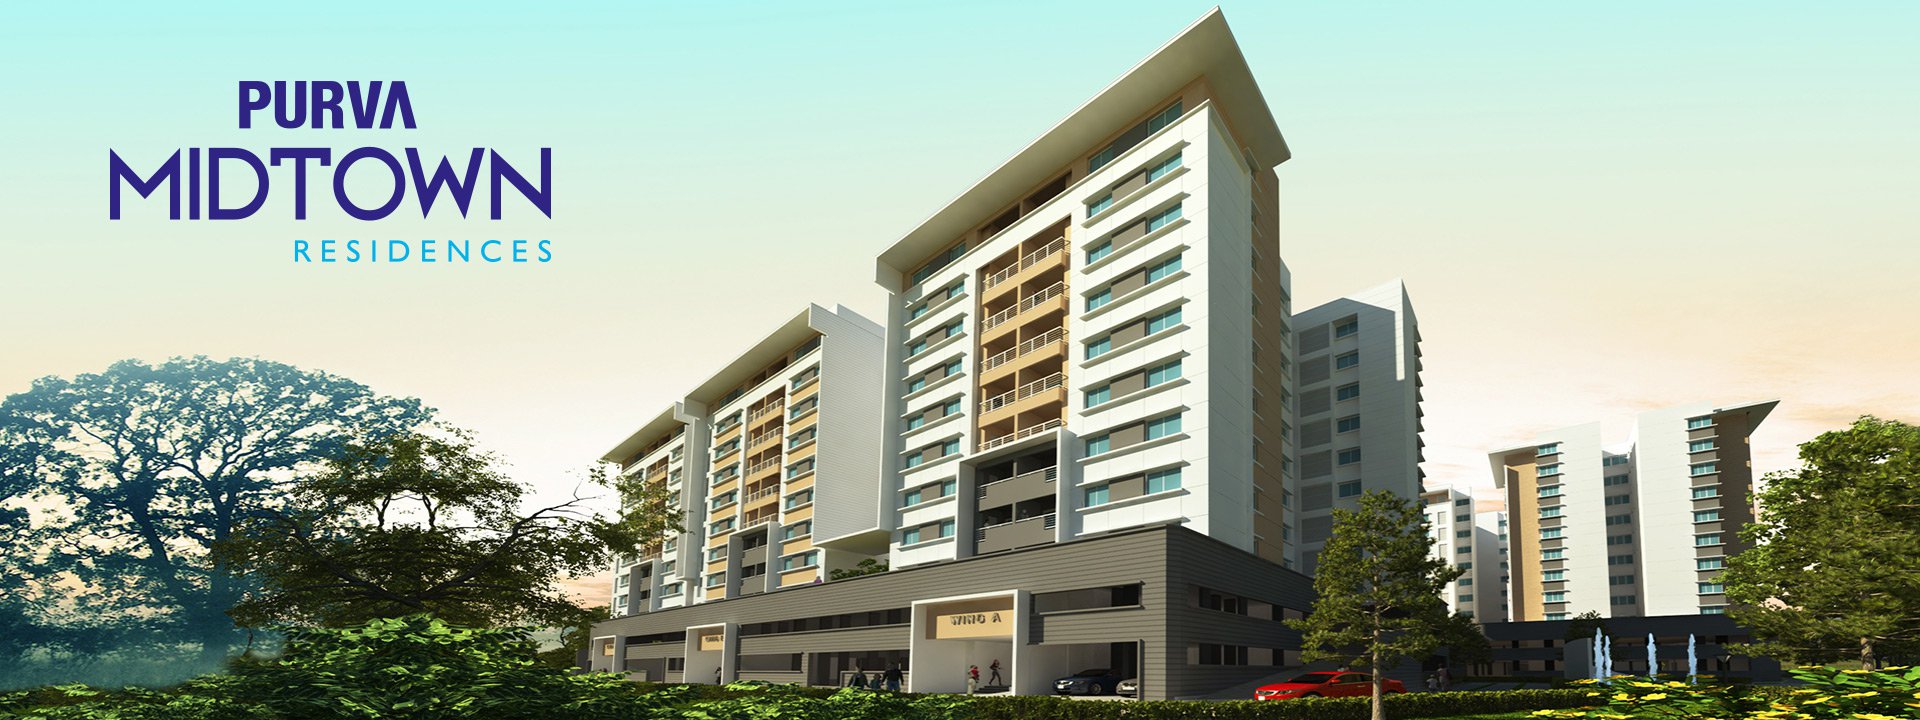 With Purva Midtown Residences live in  the heart of the city with all the modern-day luxuries Update